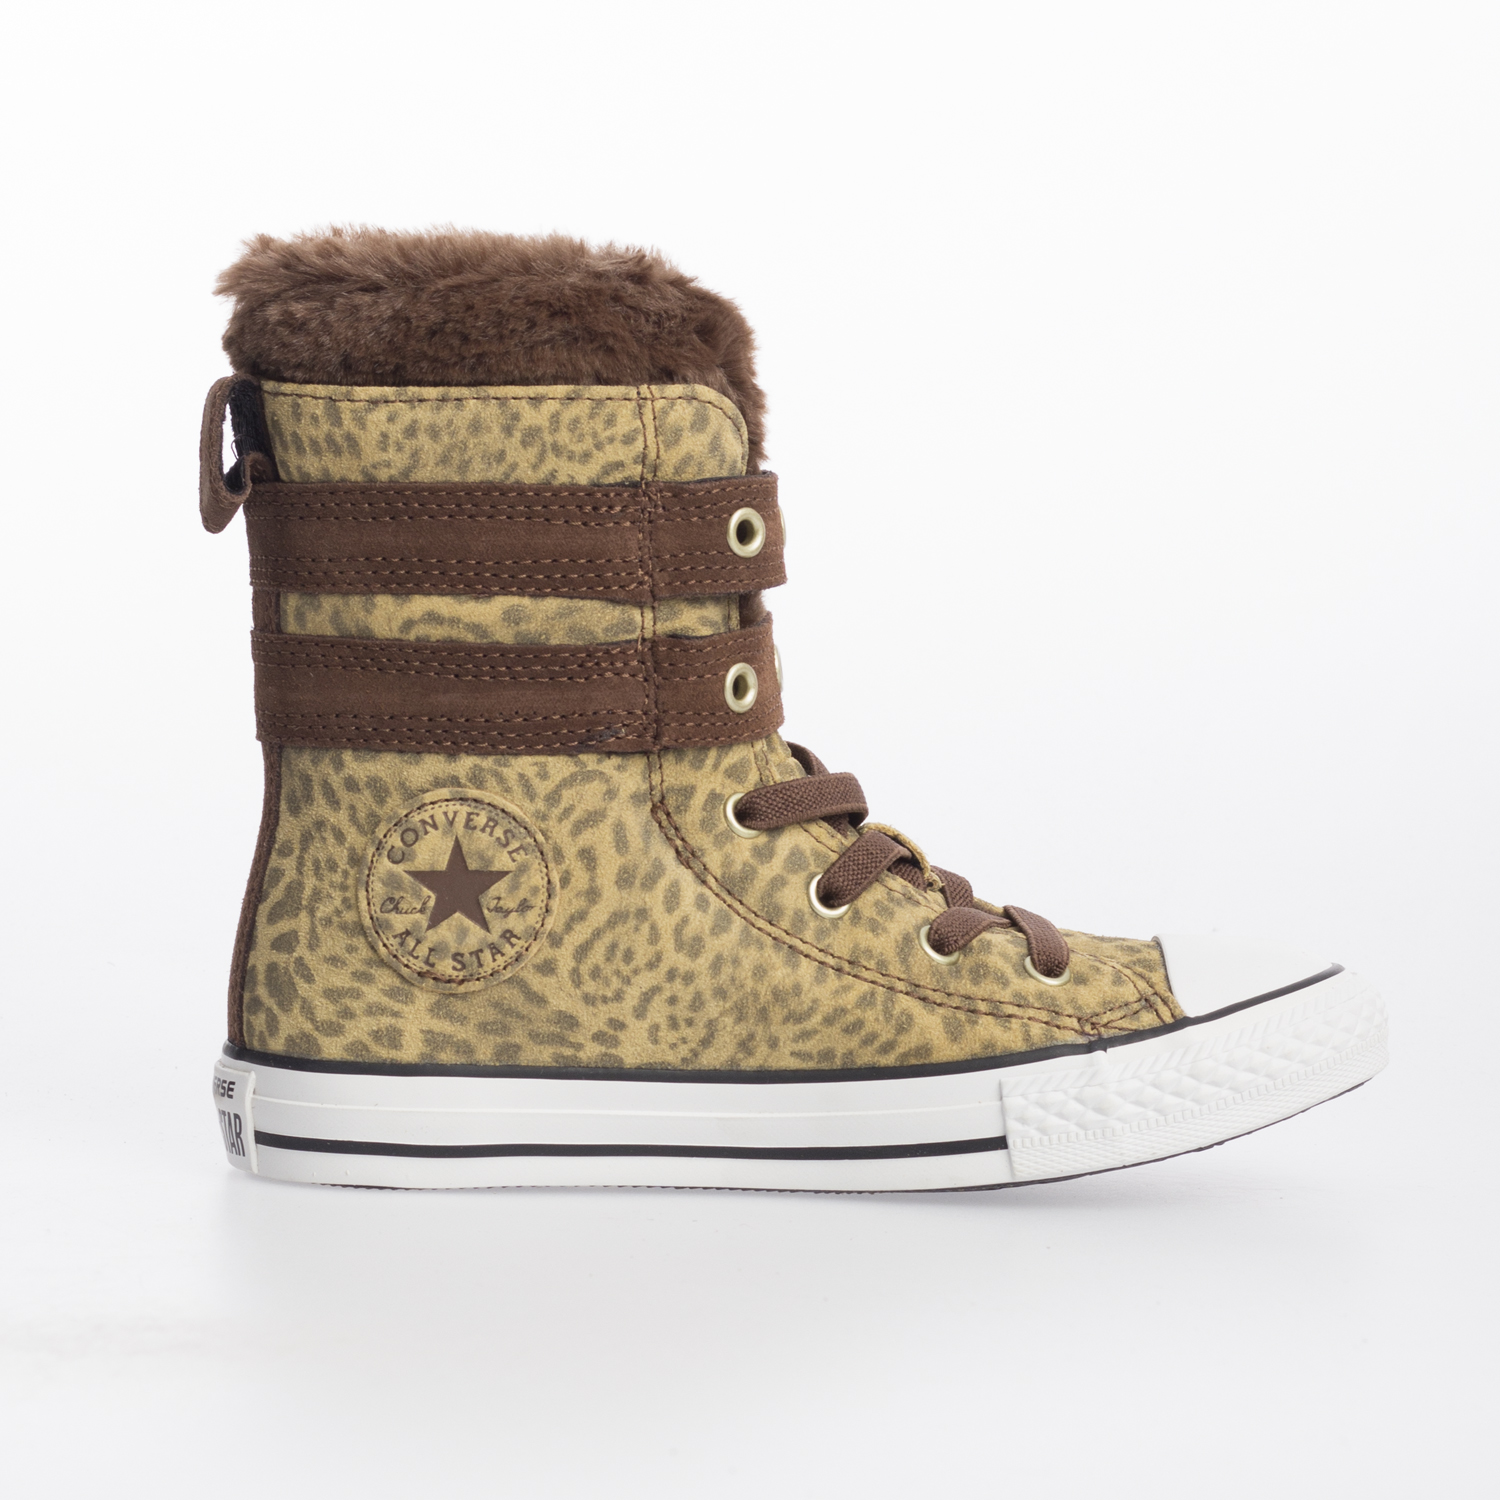 converse brown suede boots